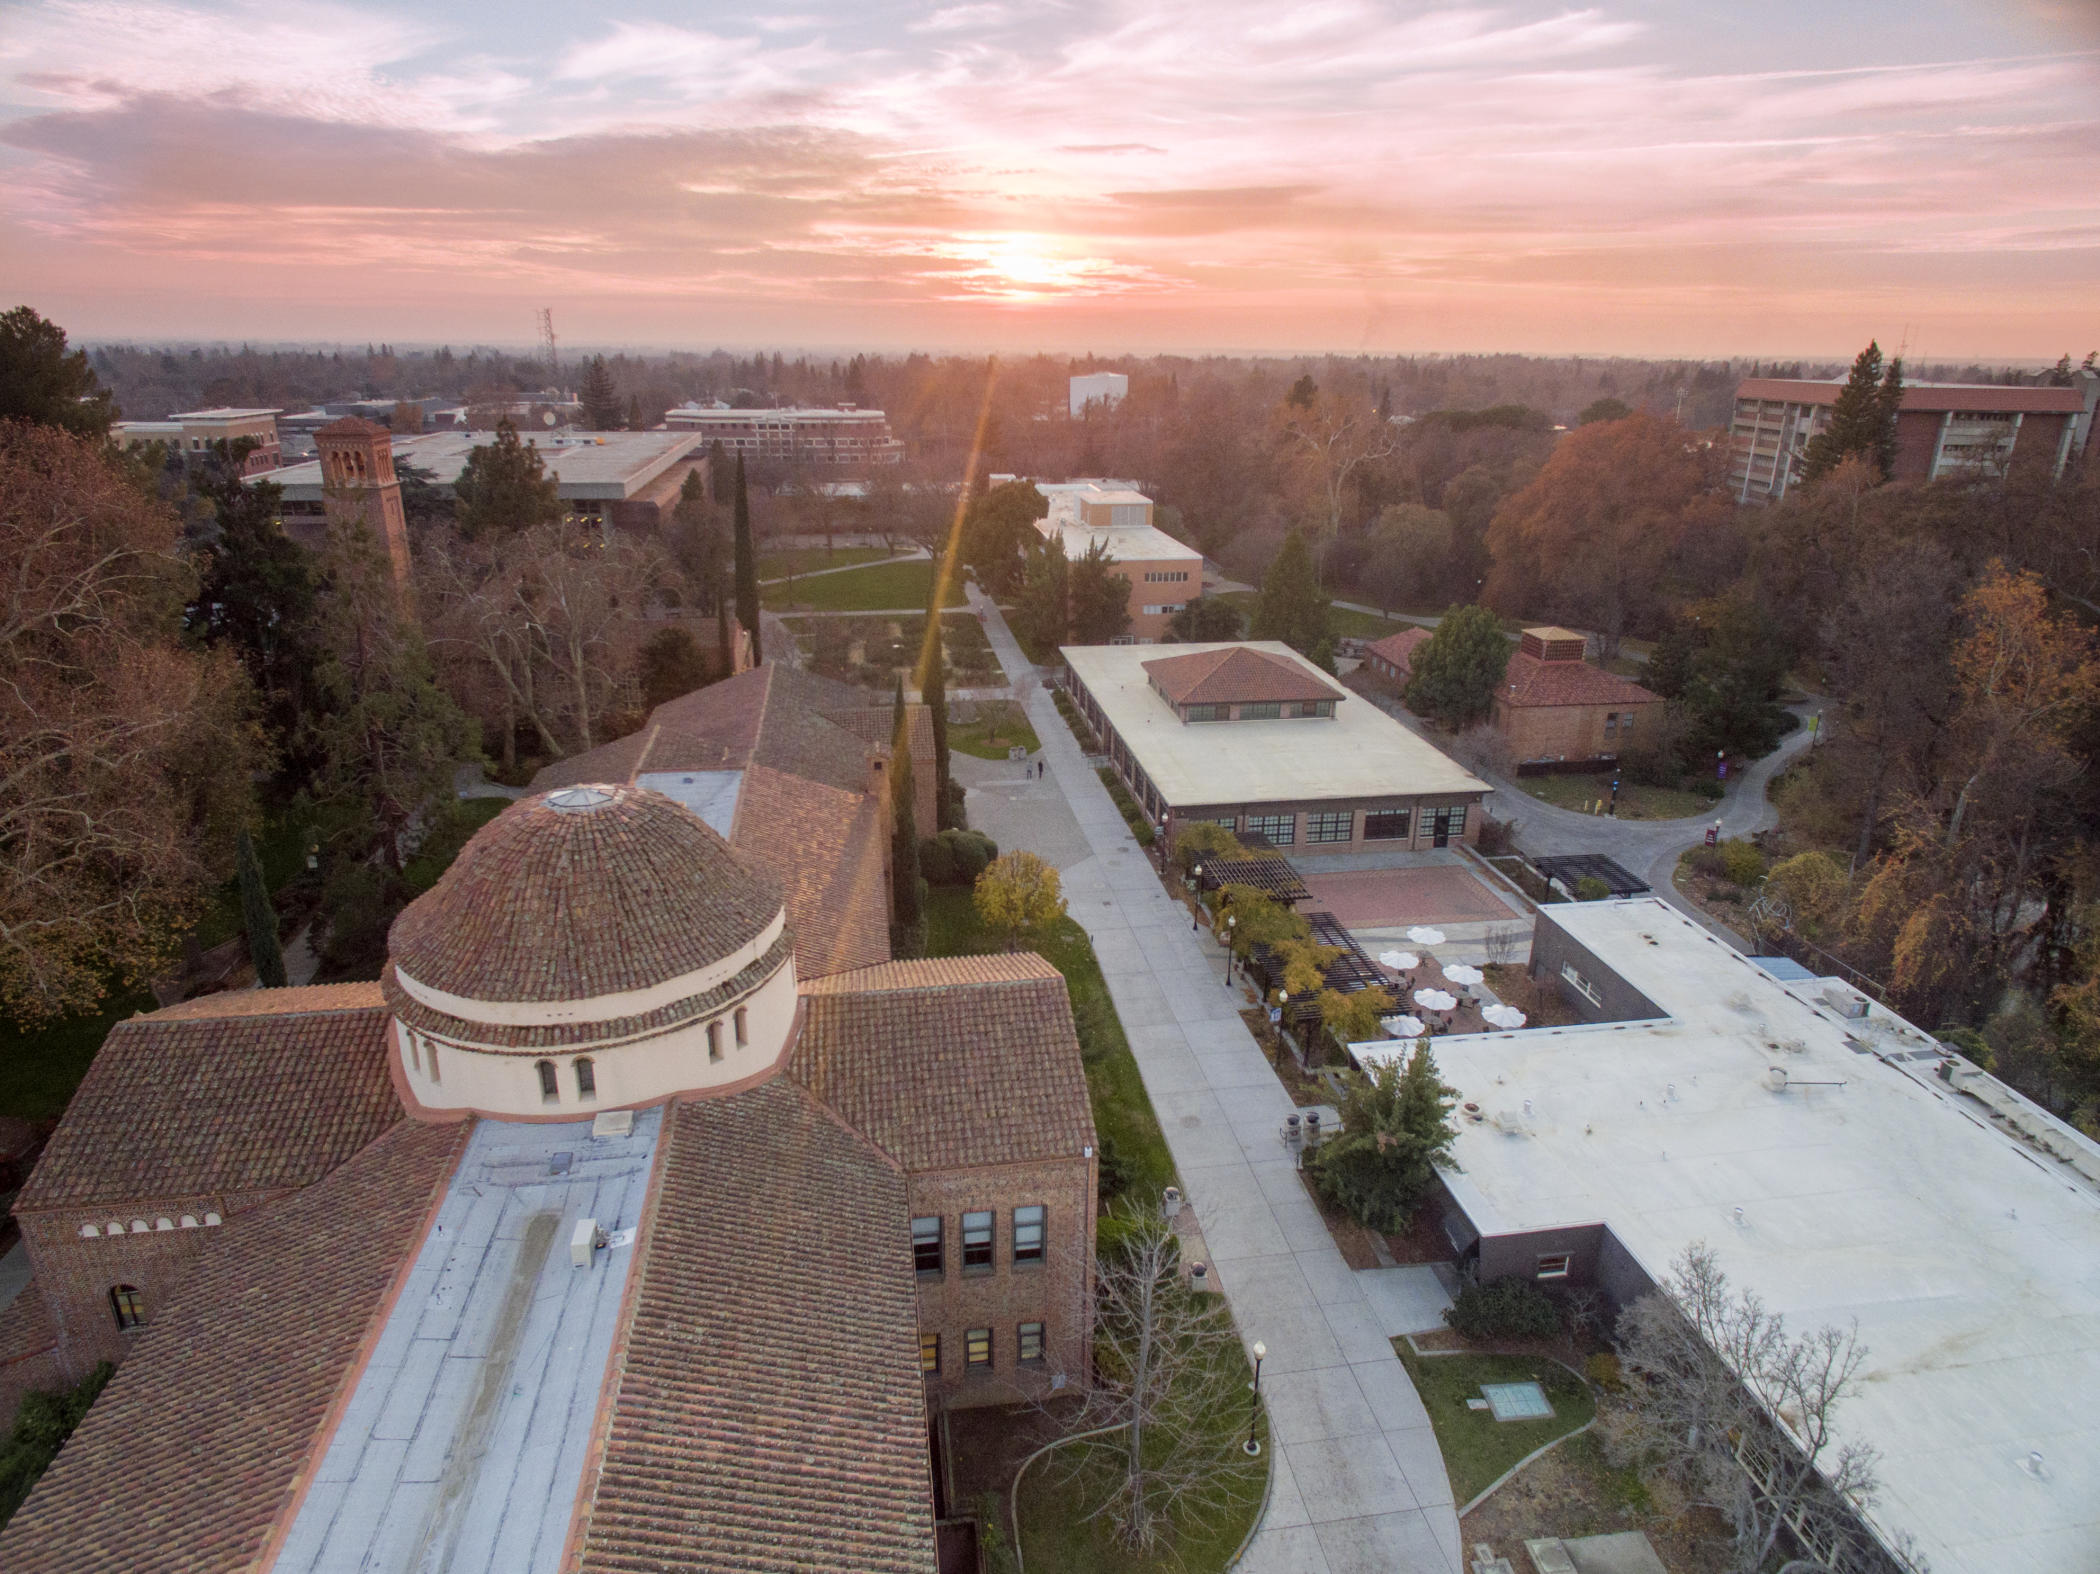 An early-winter sunset cloaks the campus in an aerial shot.